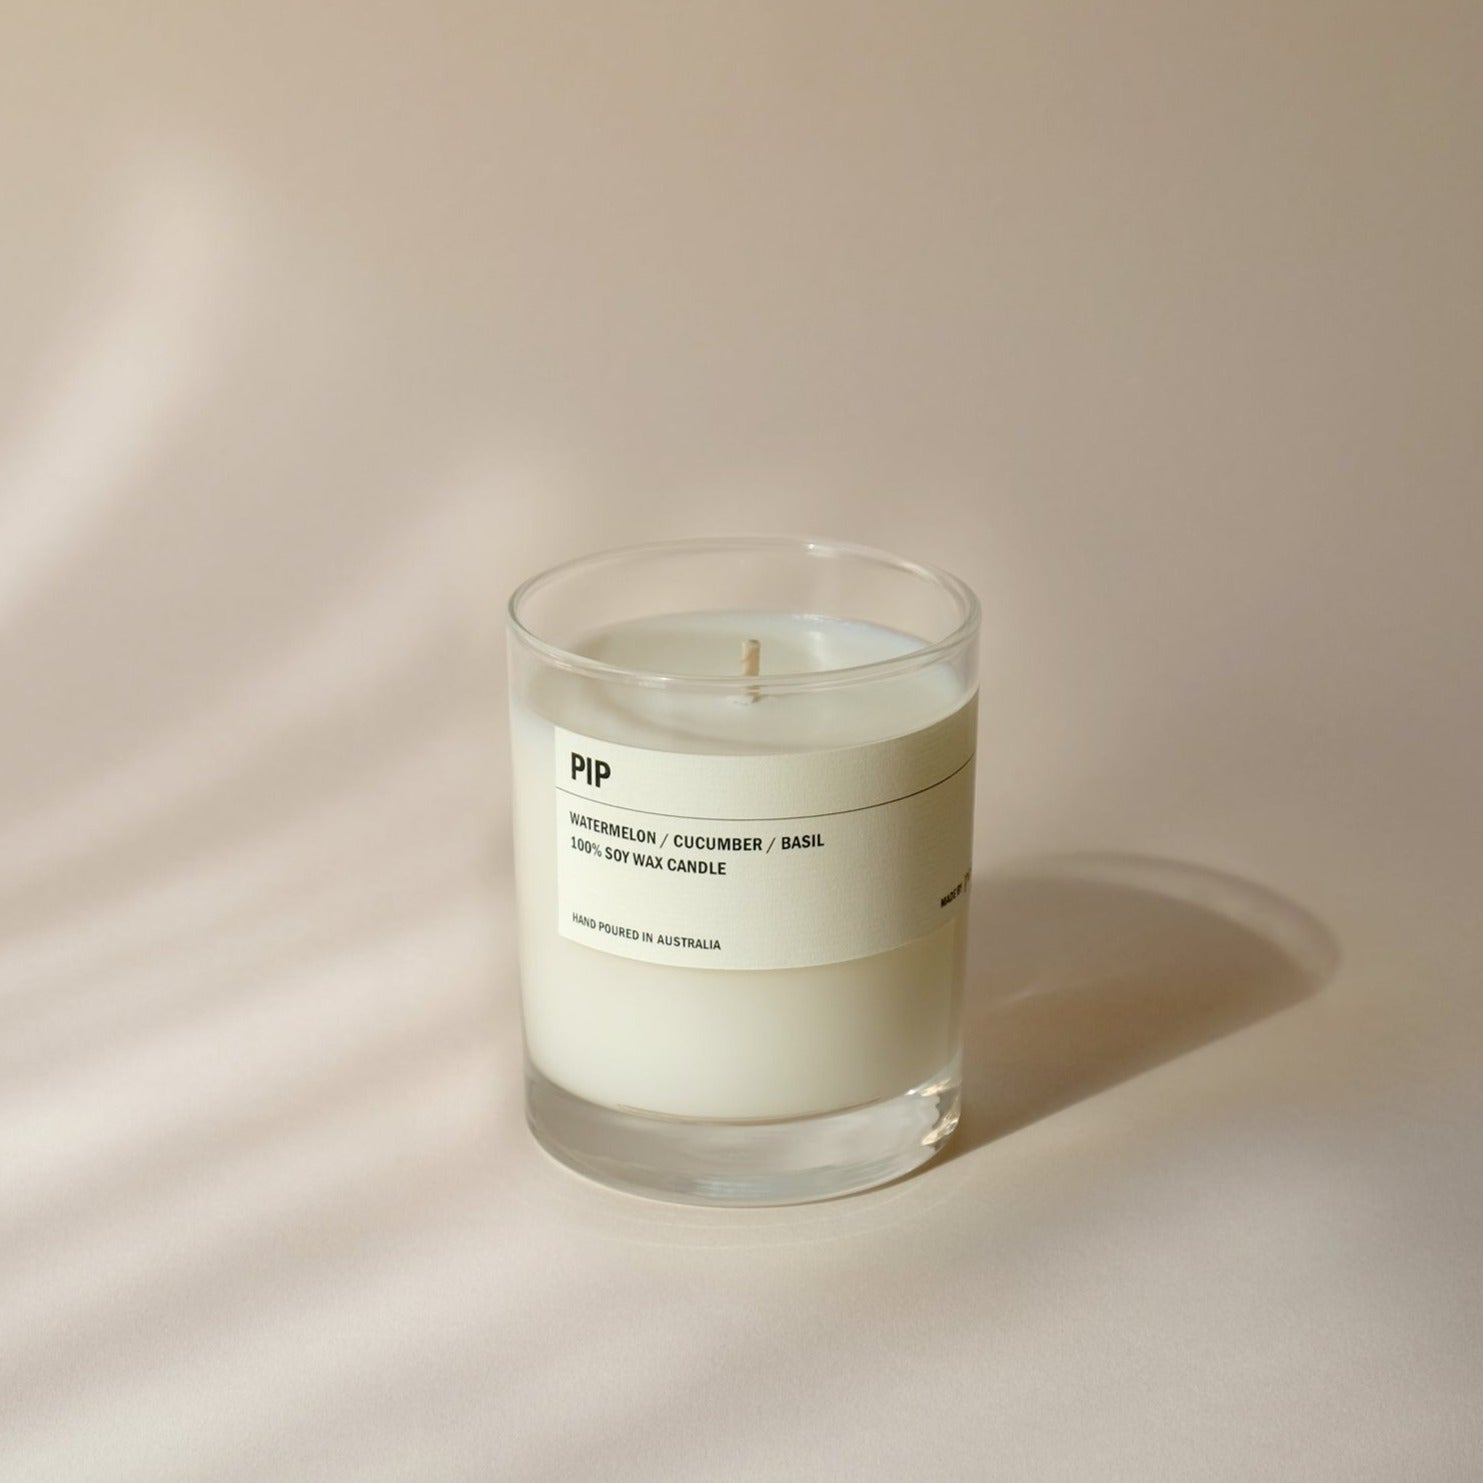 PIP Soy Wax Candle by Posie